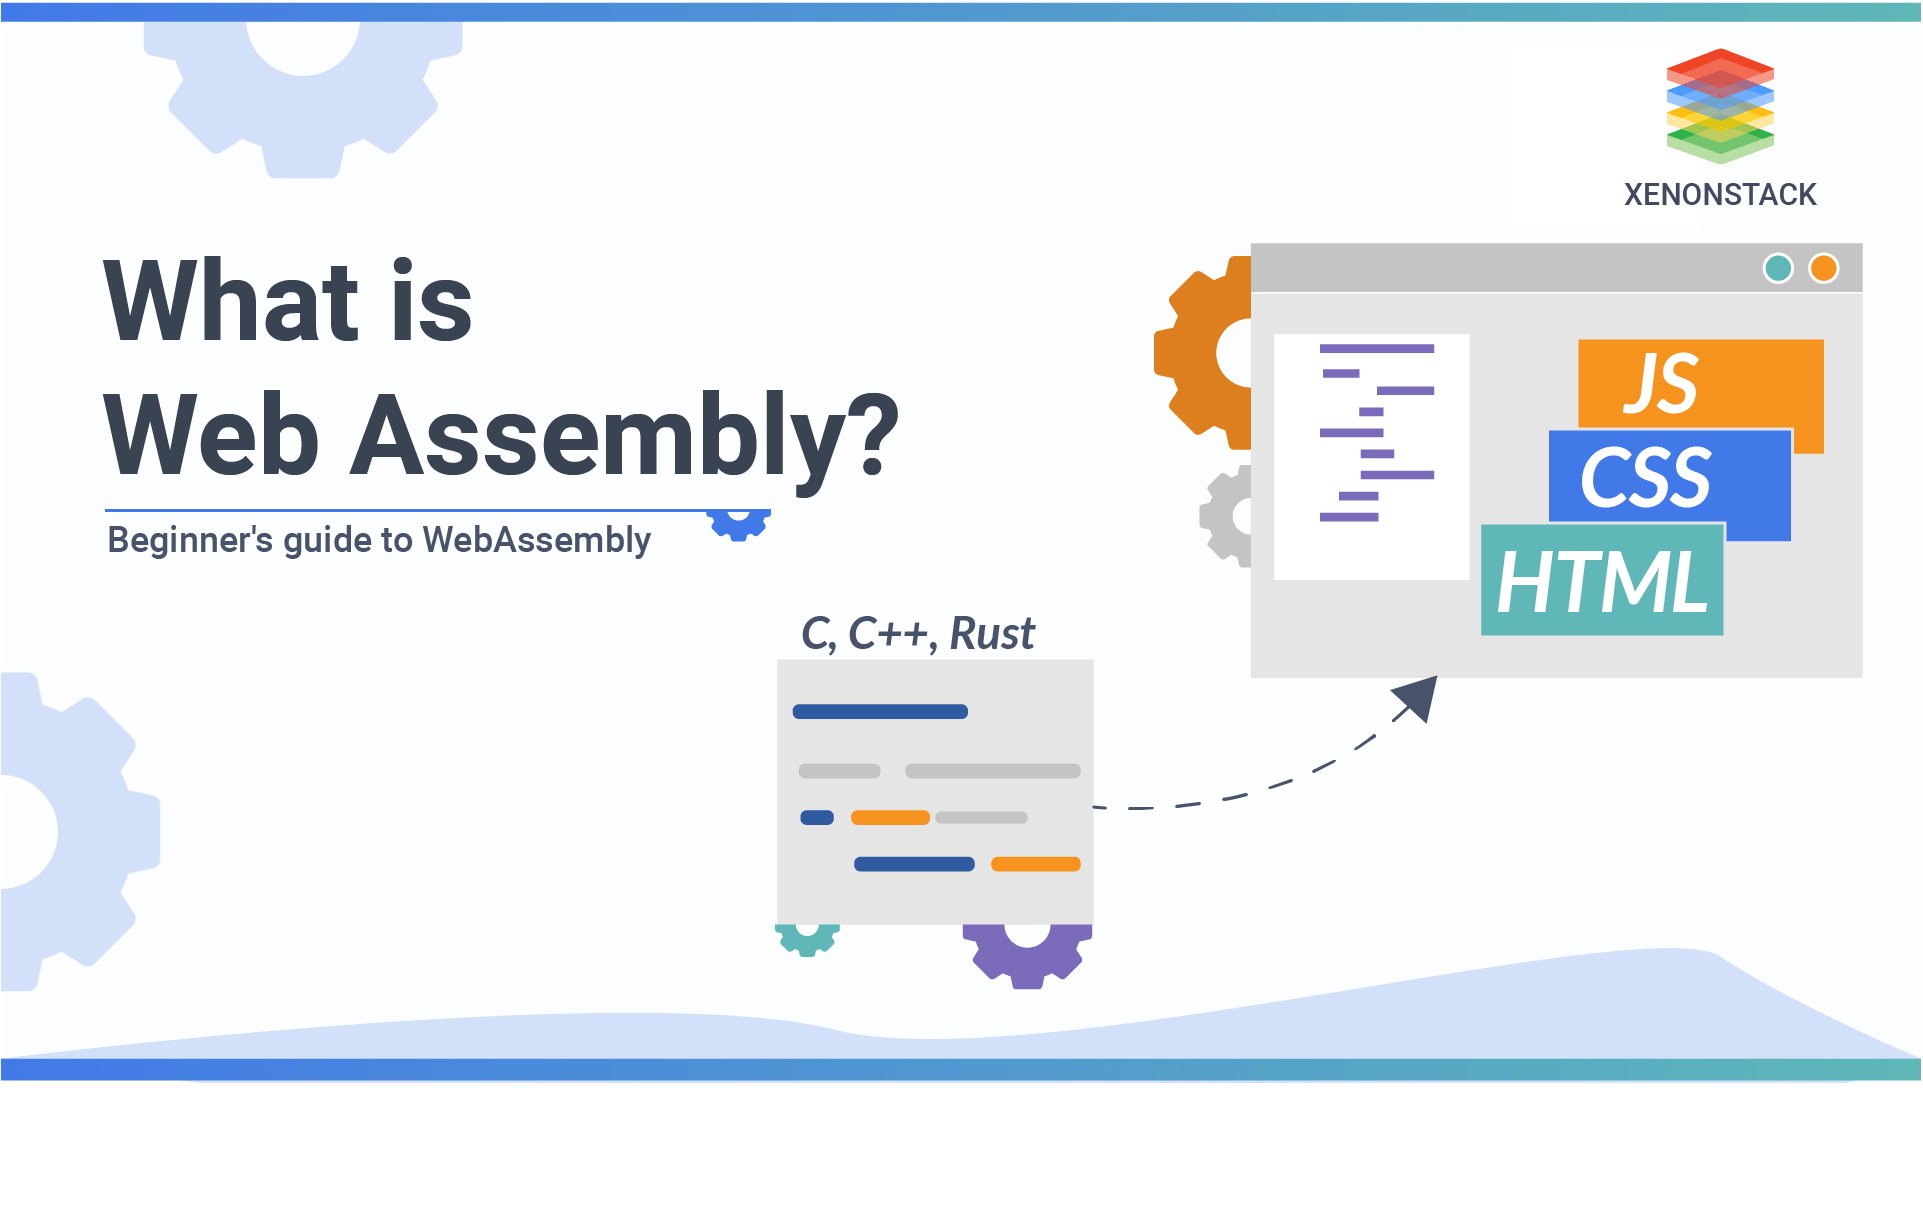 A Beginner's guide to WebAssembly